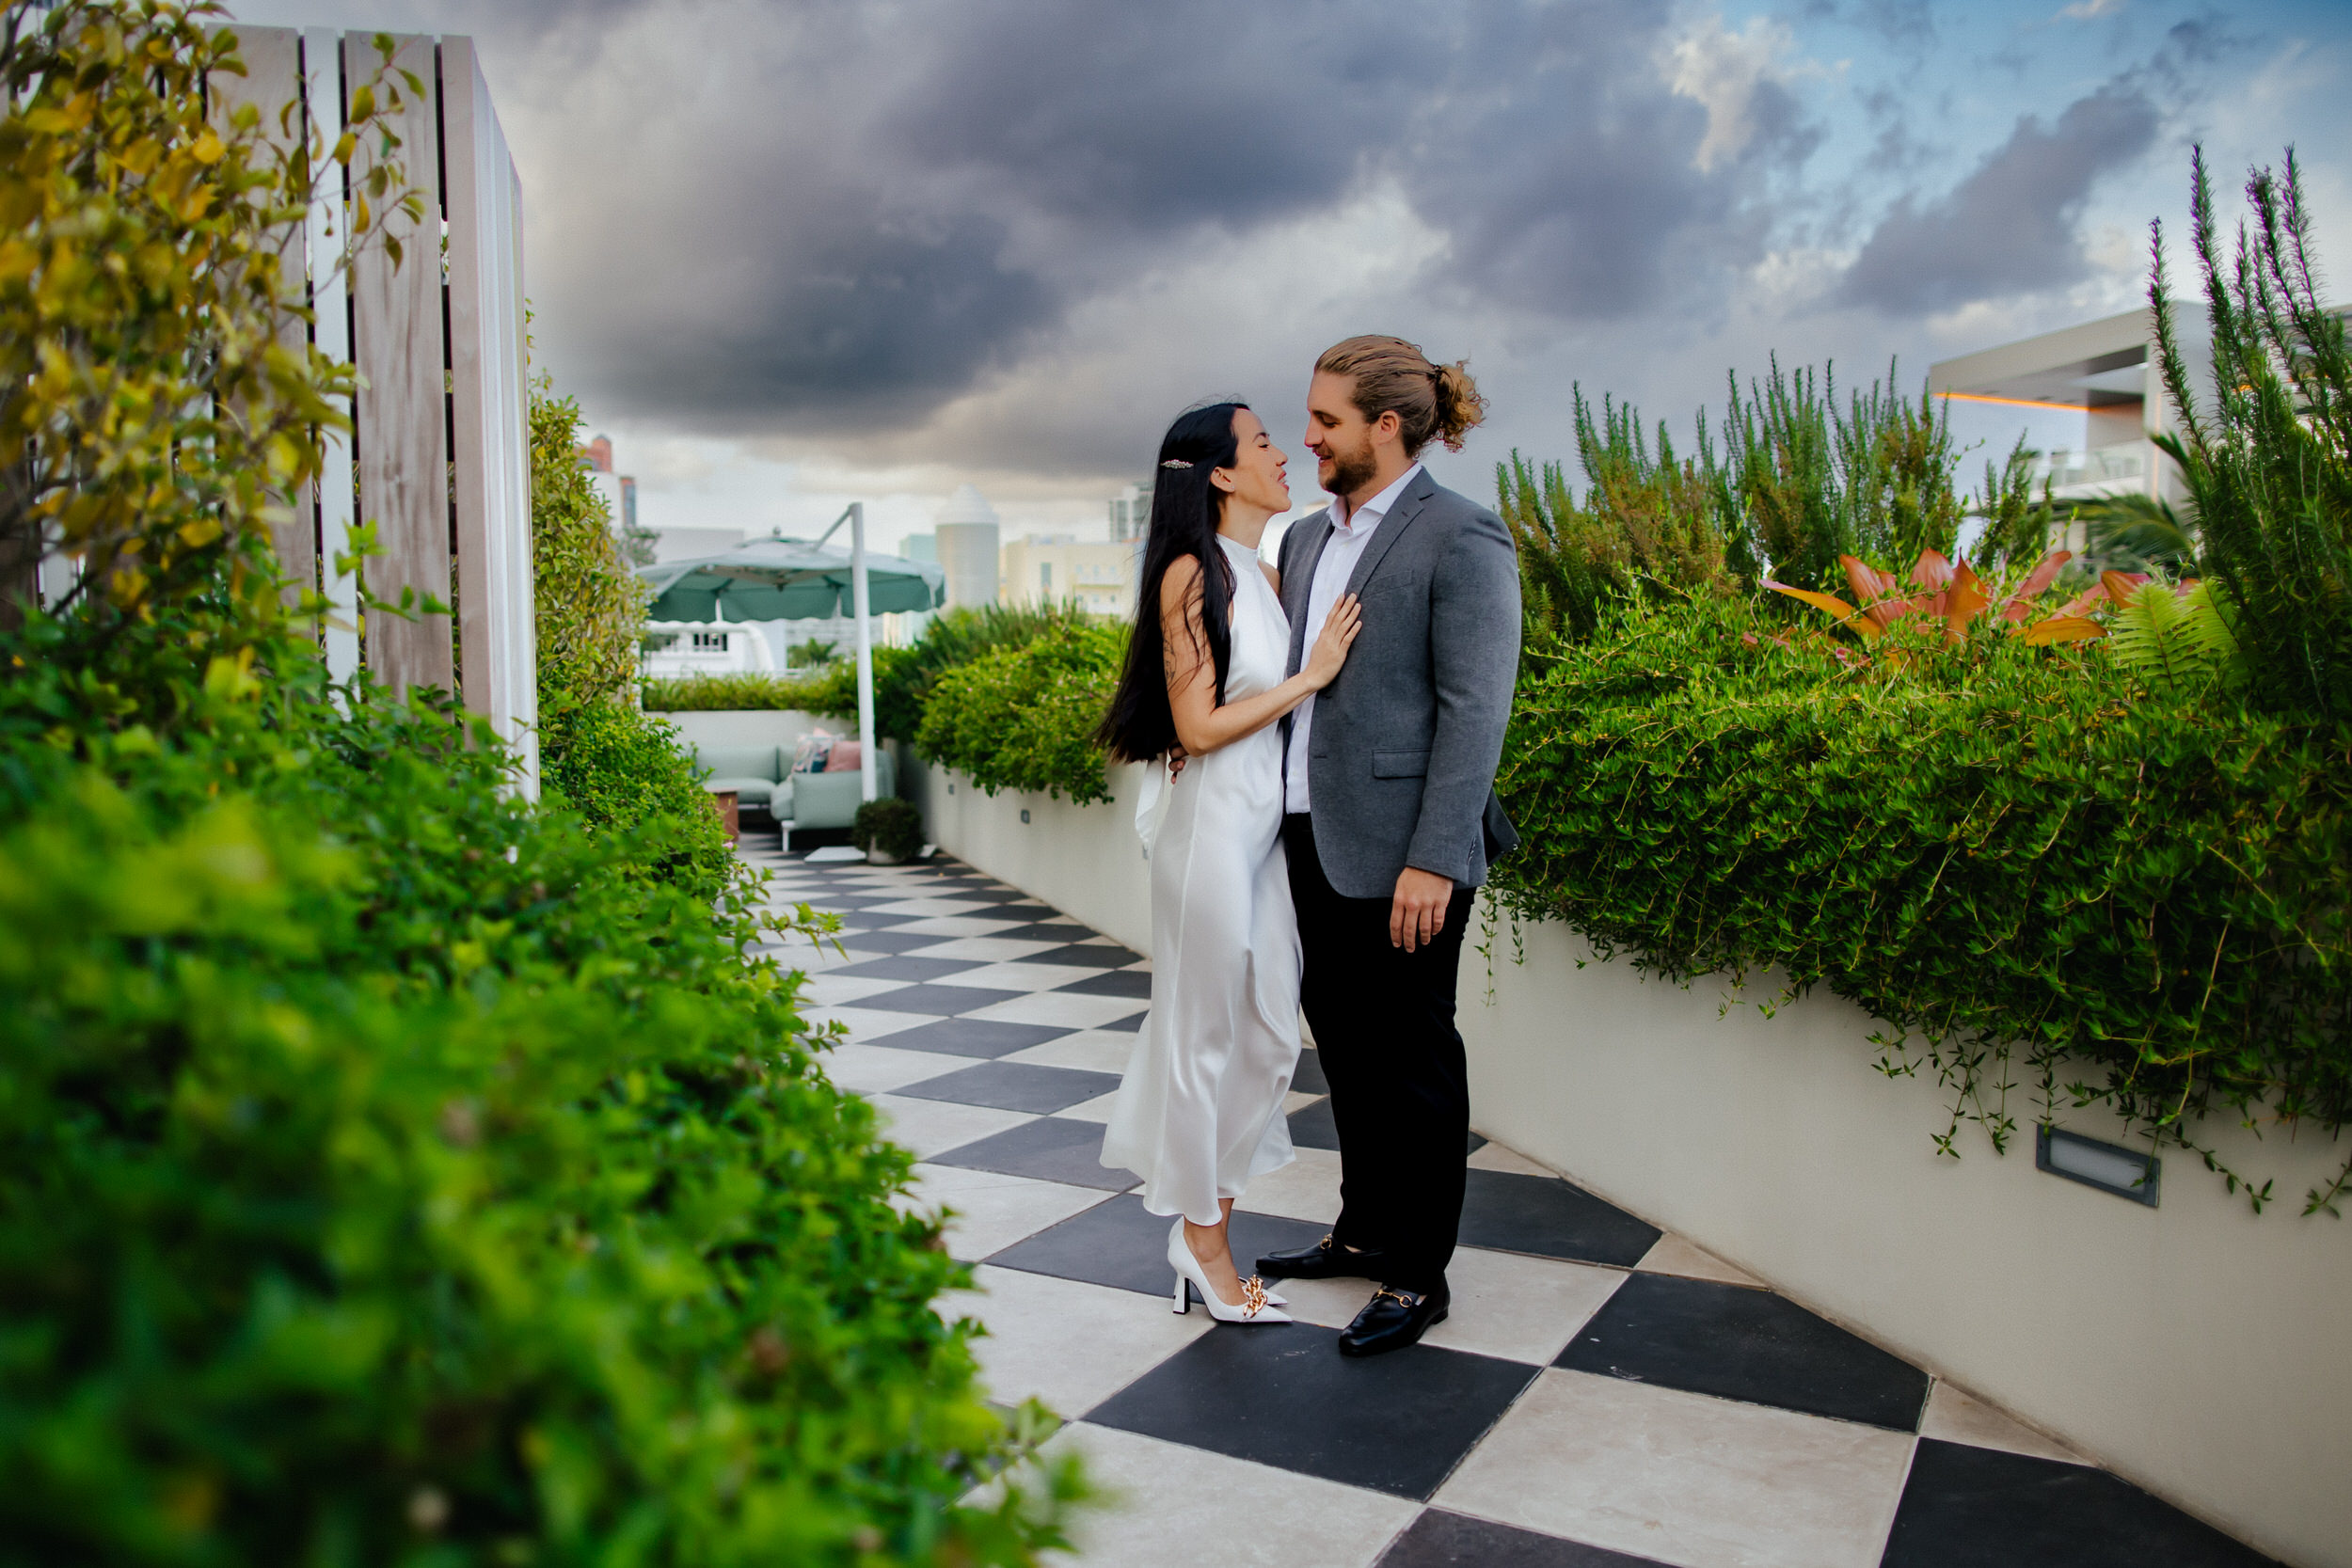 Stylish Couple Elope in South Beach on 4/20